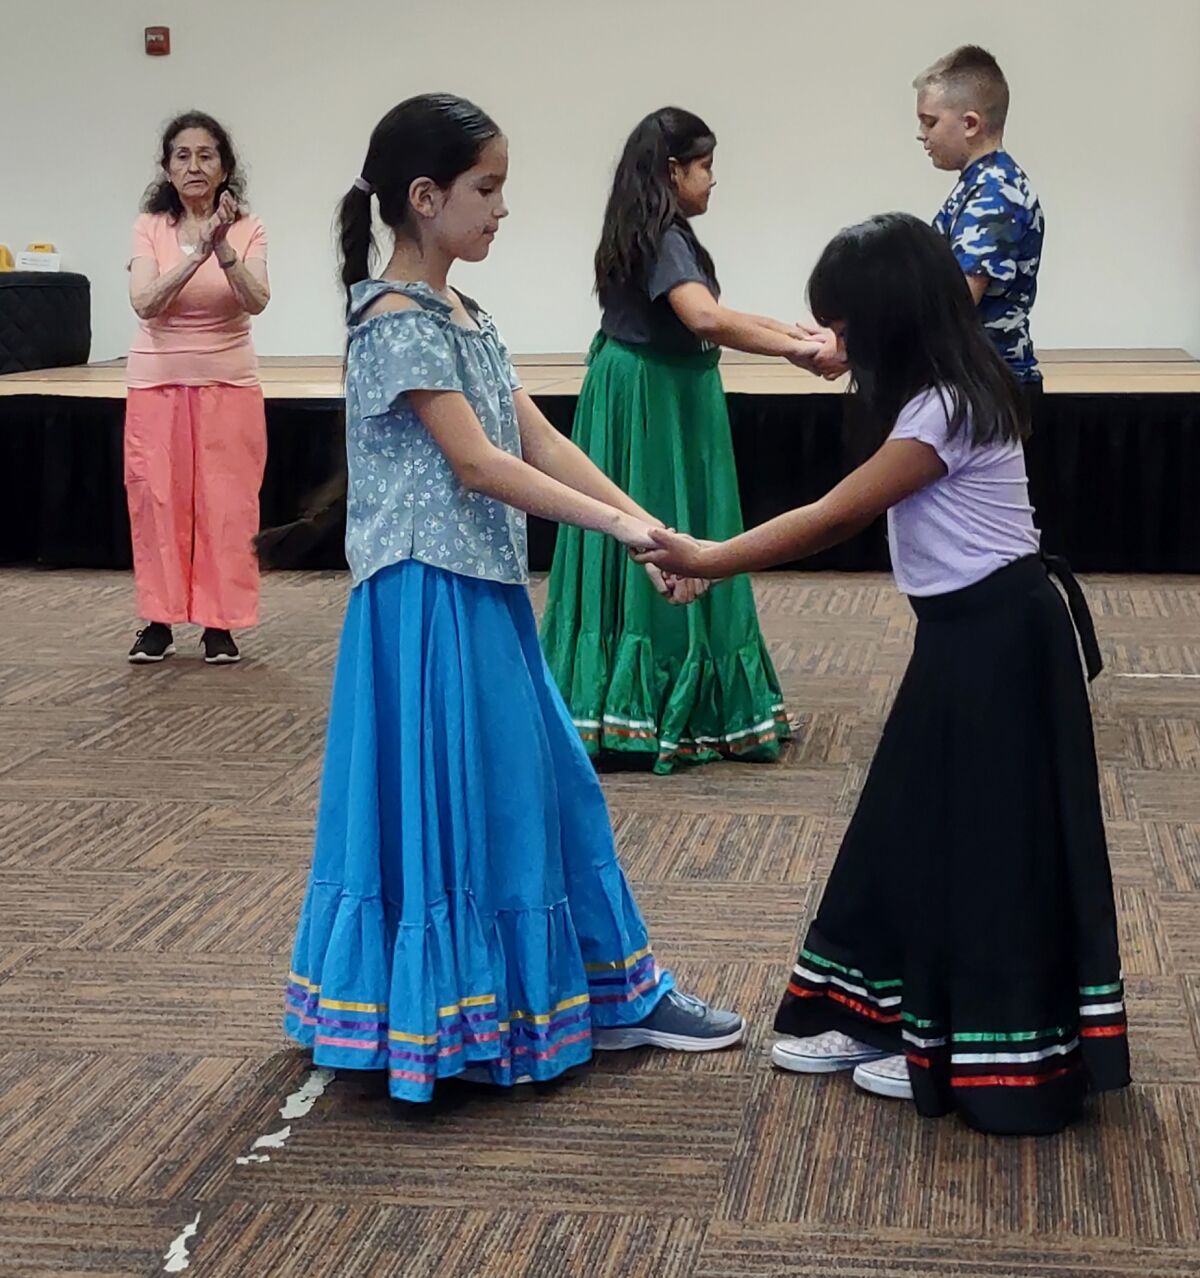 Ballet Folklorico students dance in pairs during a recent rehearsal.